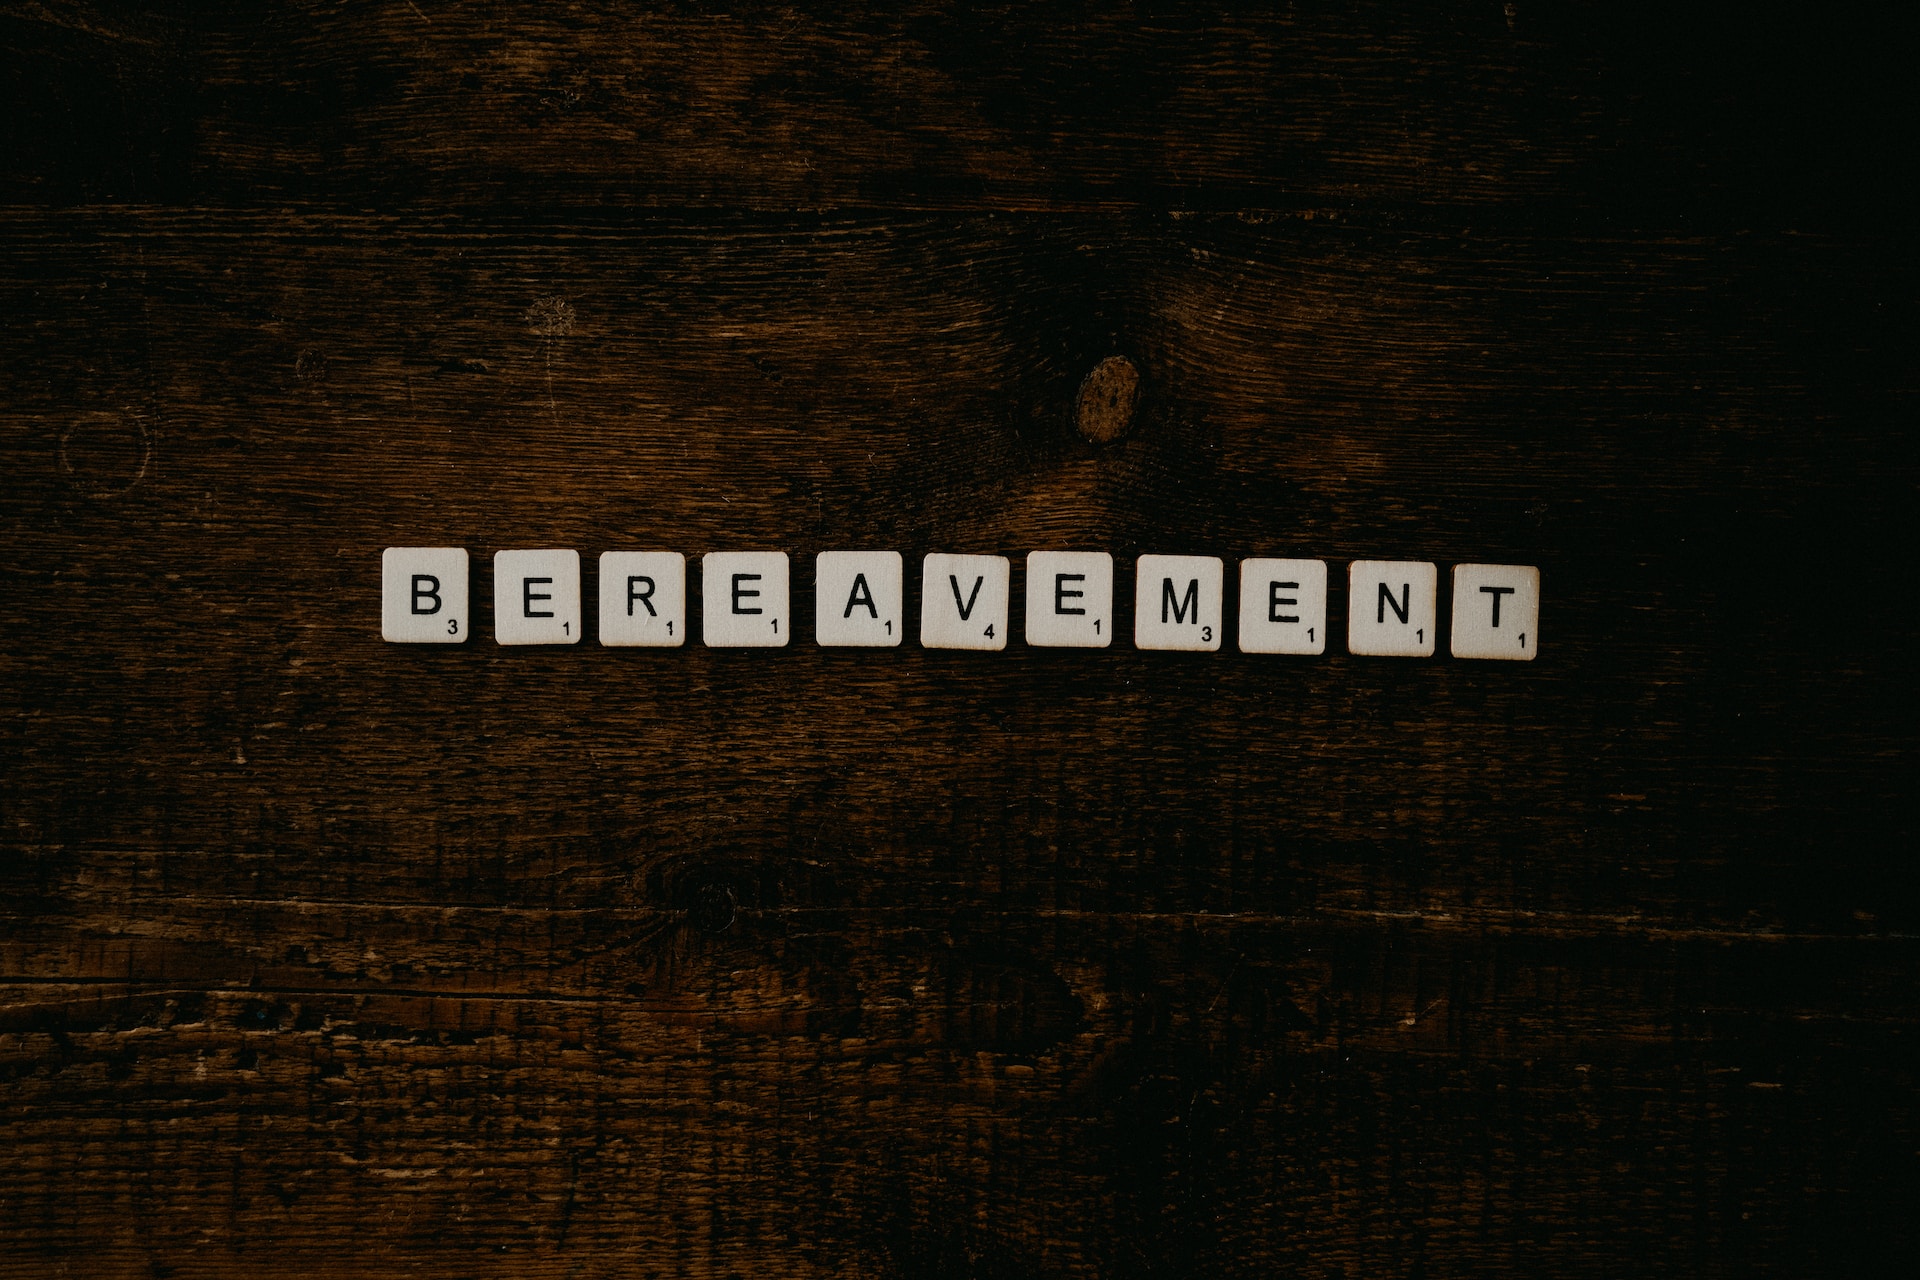 The word bereavement spelled out in scrabble letters